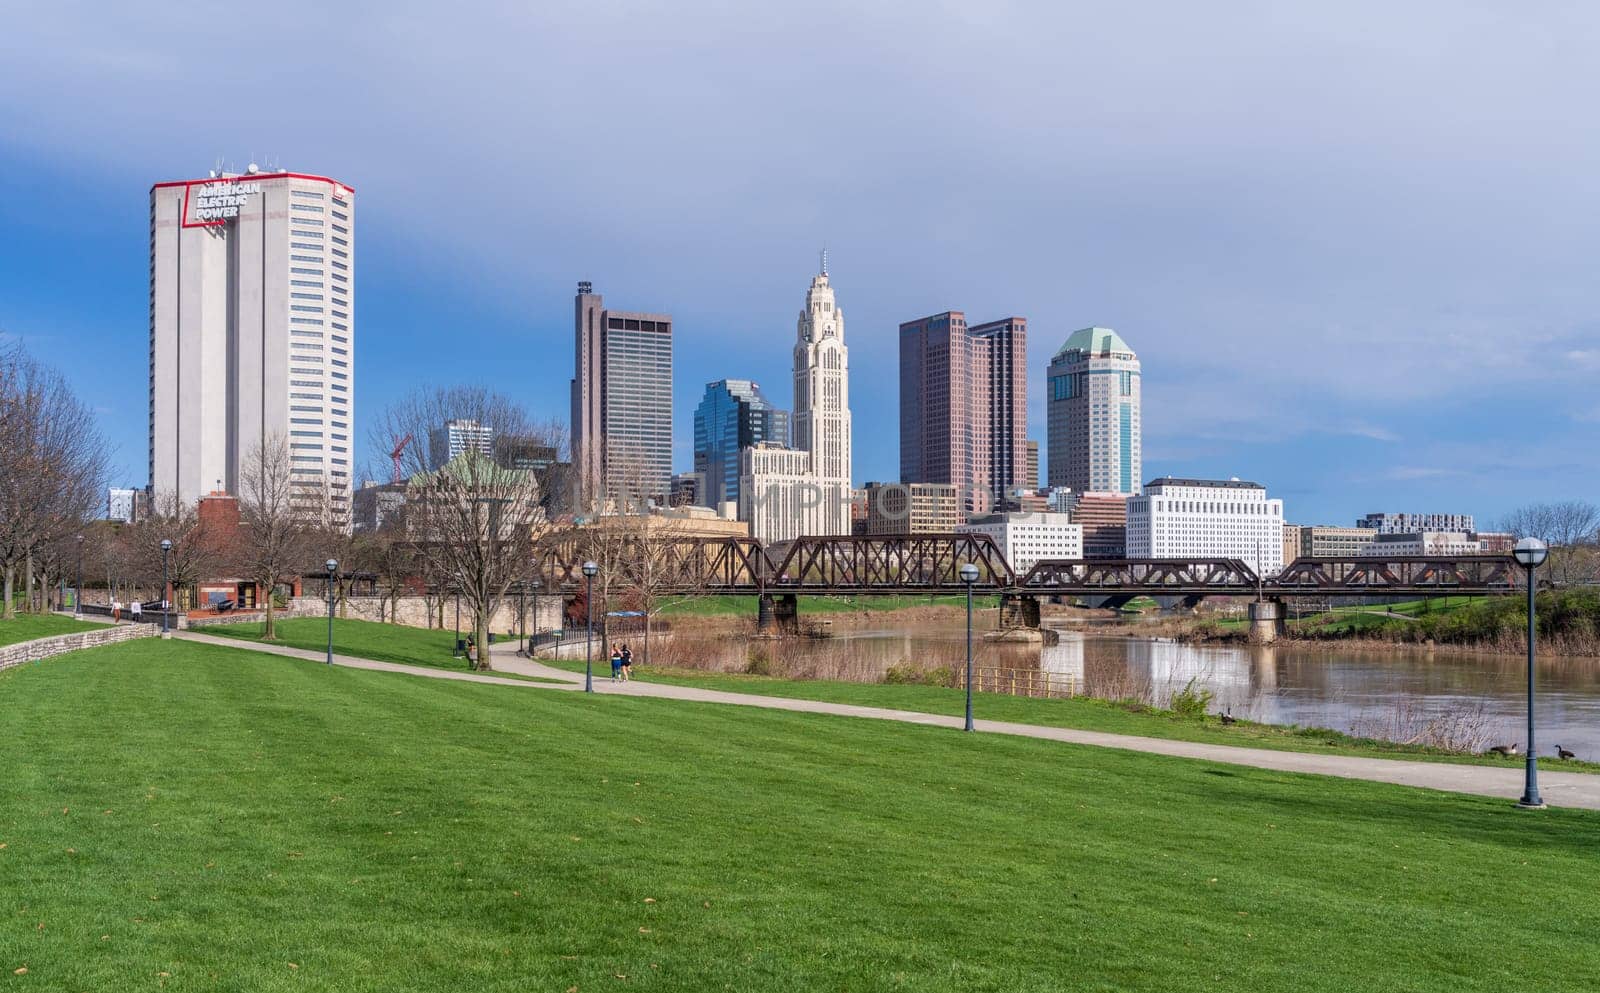 Columbus, OH - 7 April 2024: Waterfront view of the downtown financial district from the River Scioto through a railroad truss bridge